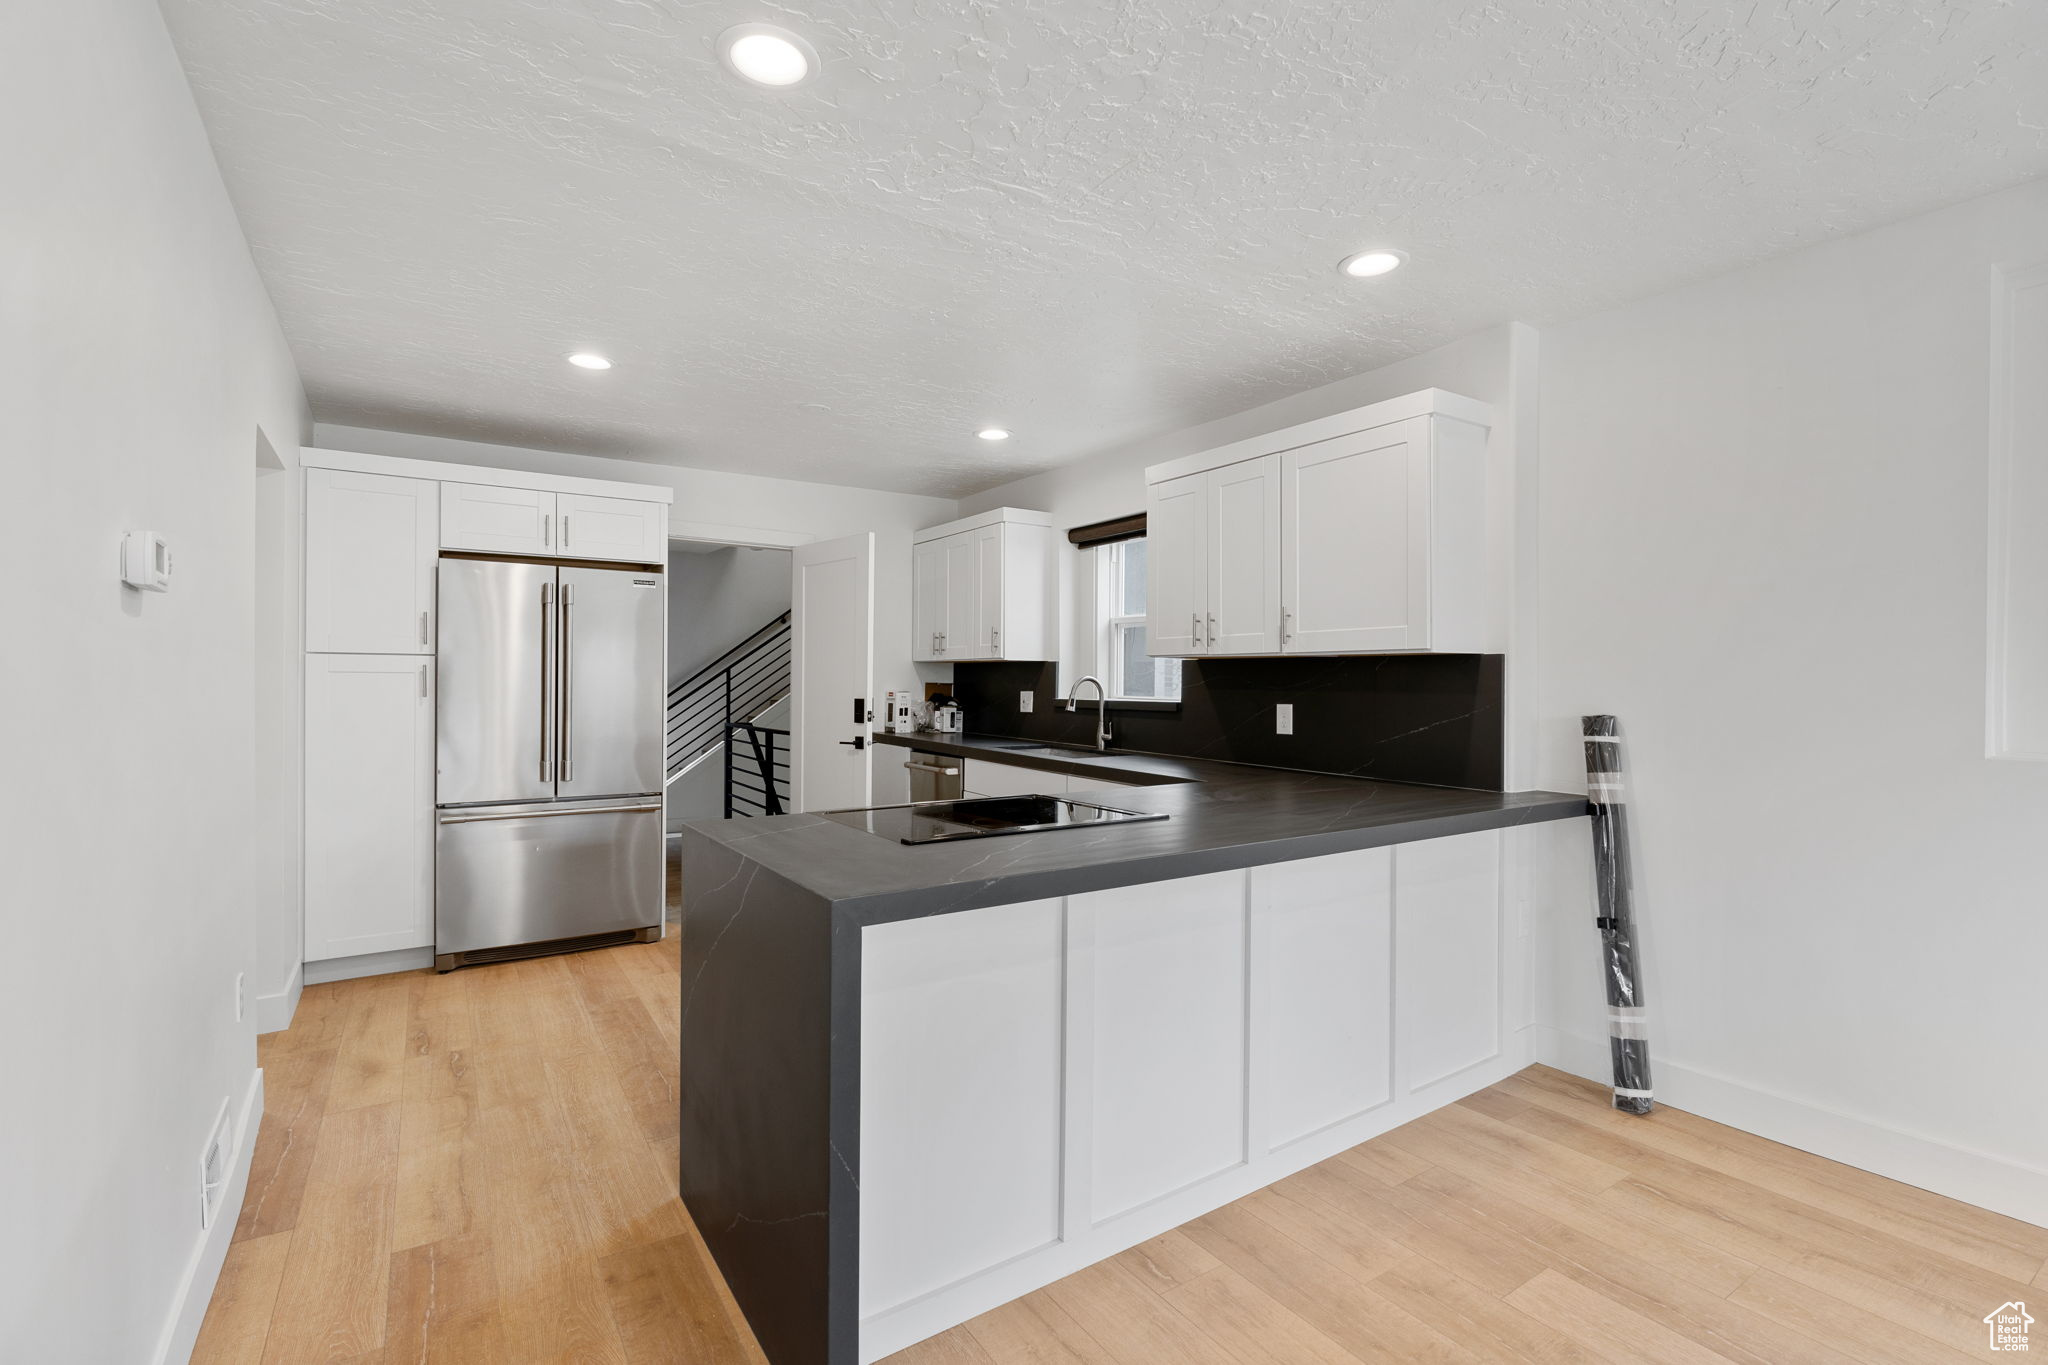 Kitchen with built in refrigerator, light hardwood / wood-style flooring, white cabinets, and kitchen peninsula